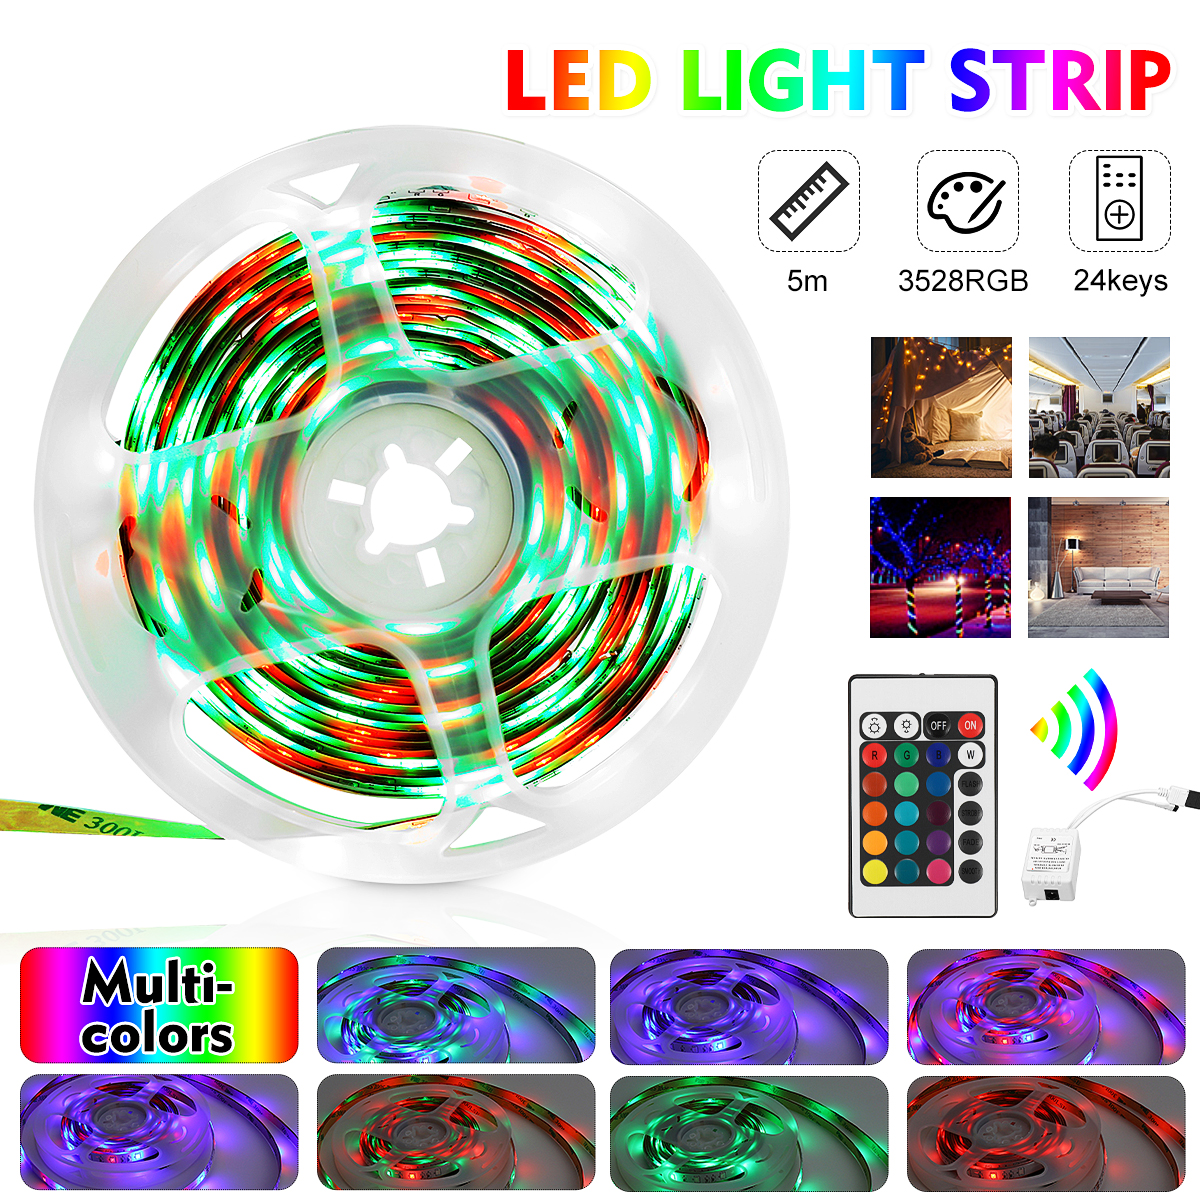 Find 5M 300LED Strip Light Kit SMD3528 Flexible RGB Waterproof Flexible Lamp Home Car 24 Key IR Remote Control for Sale on Gipsybee.com with cryptocurrencies